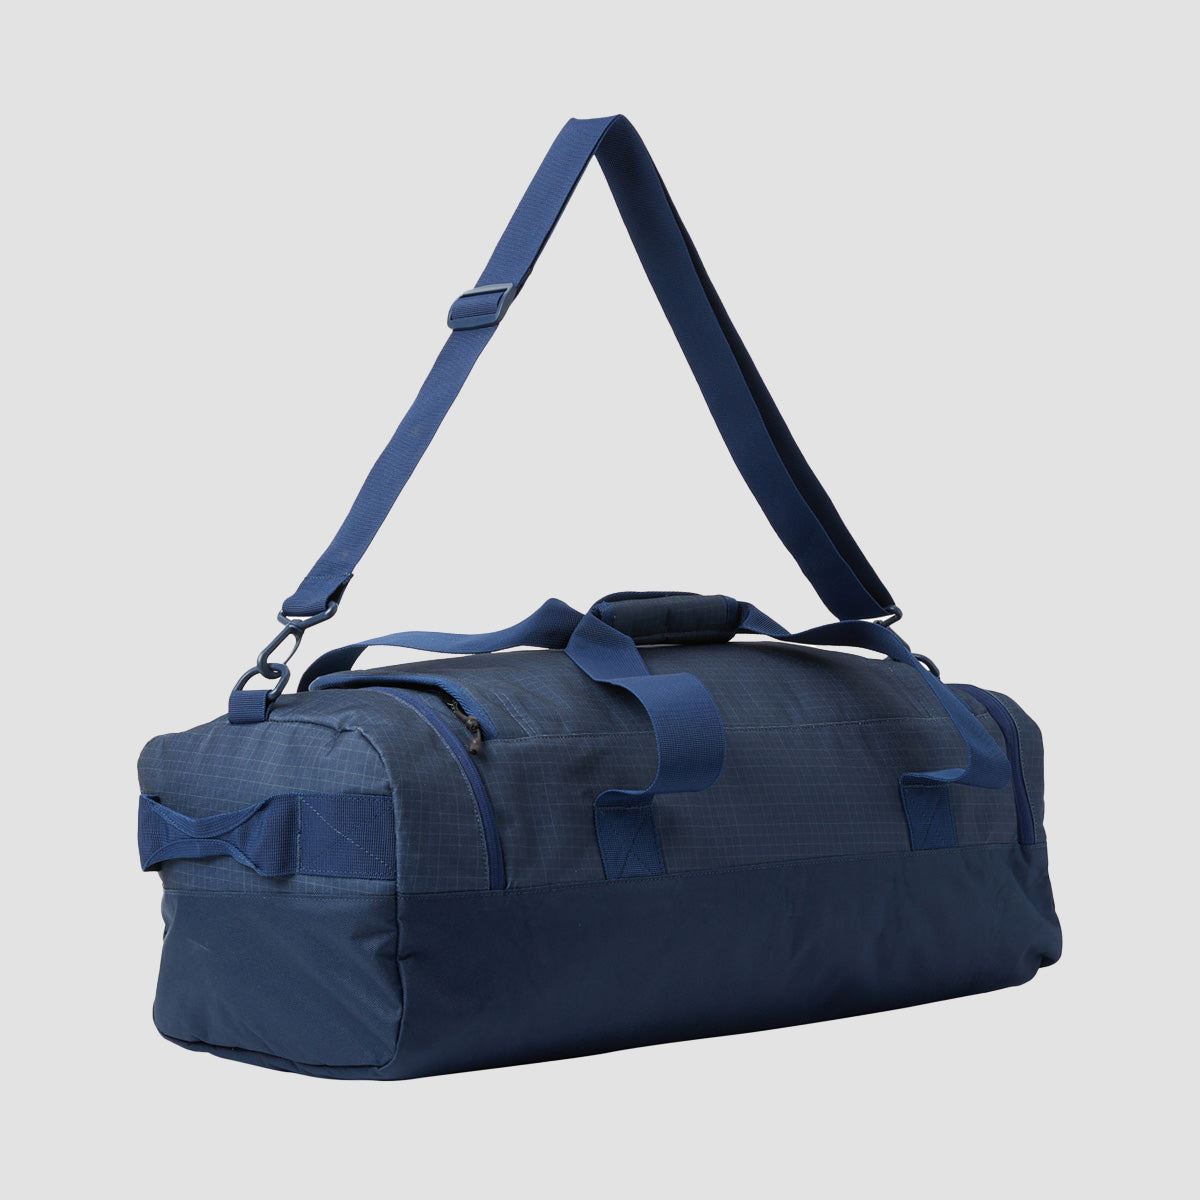 Quiksilver Shelter 40L Duffle Bag Naval Academy